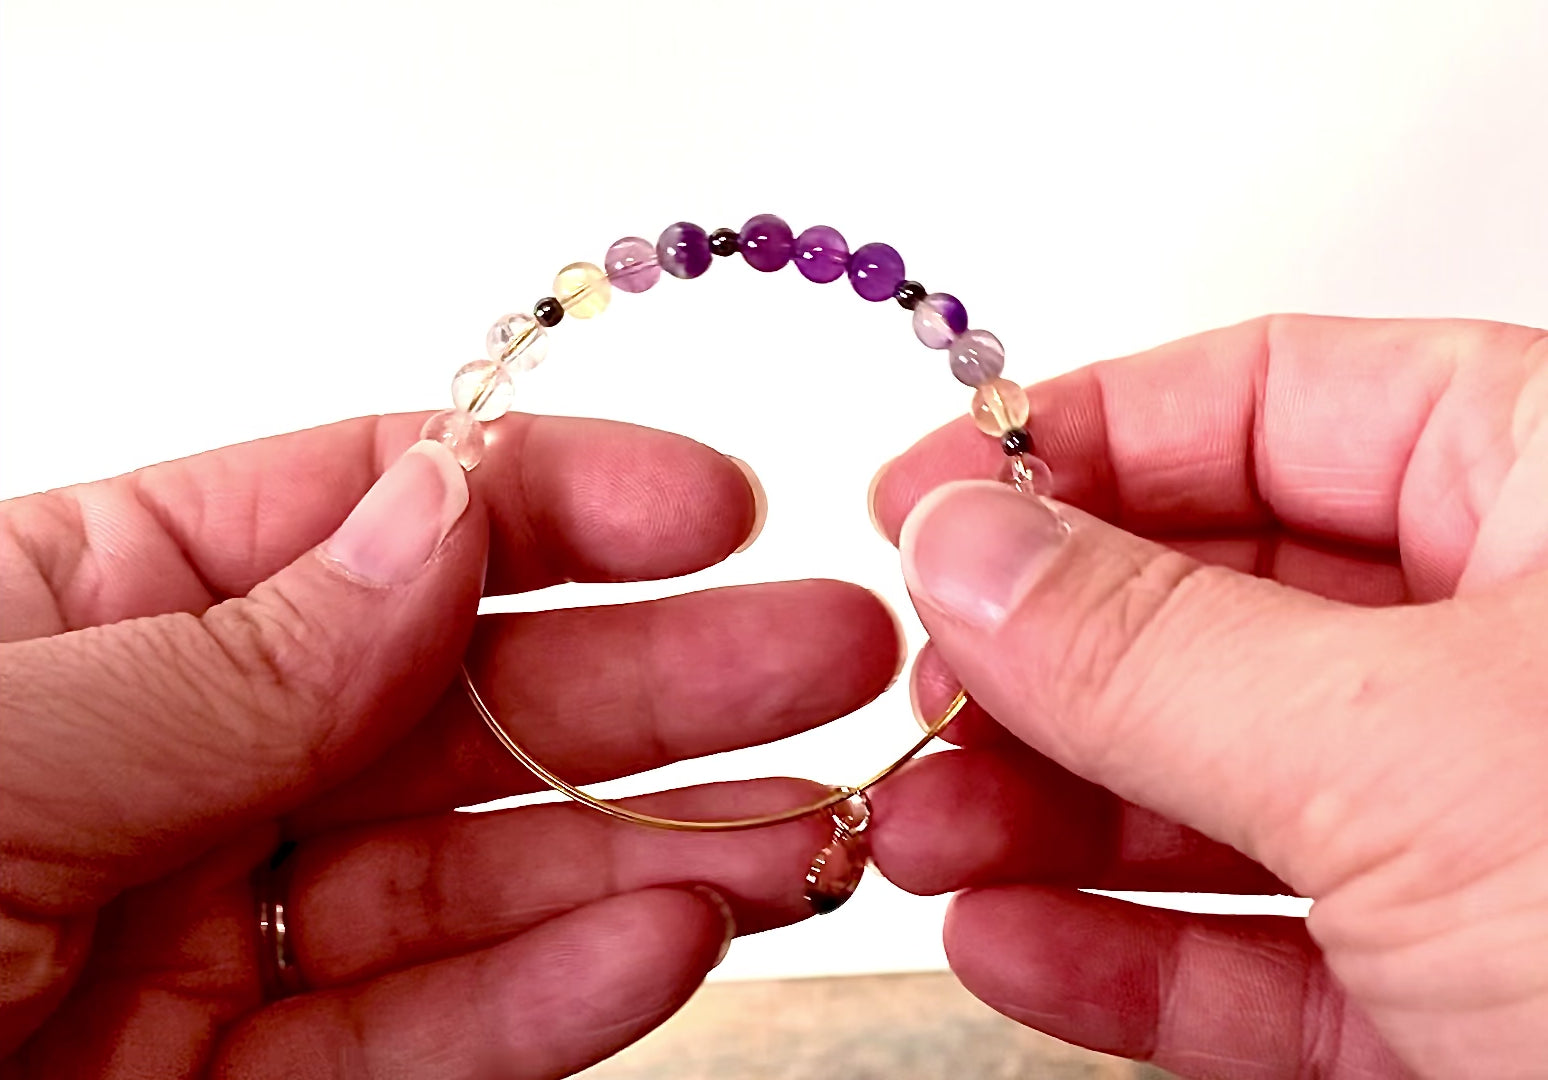 Mens Healing Crystal Bracelet With Amethyst Strand And Lepidolite Stones  Trendy Black Onyx Design, High Quality Jewelry By Dhgarden DHDNN From  Dh_garden, $22.15 | DHgate.Com